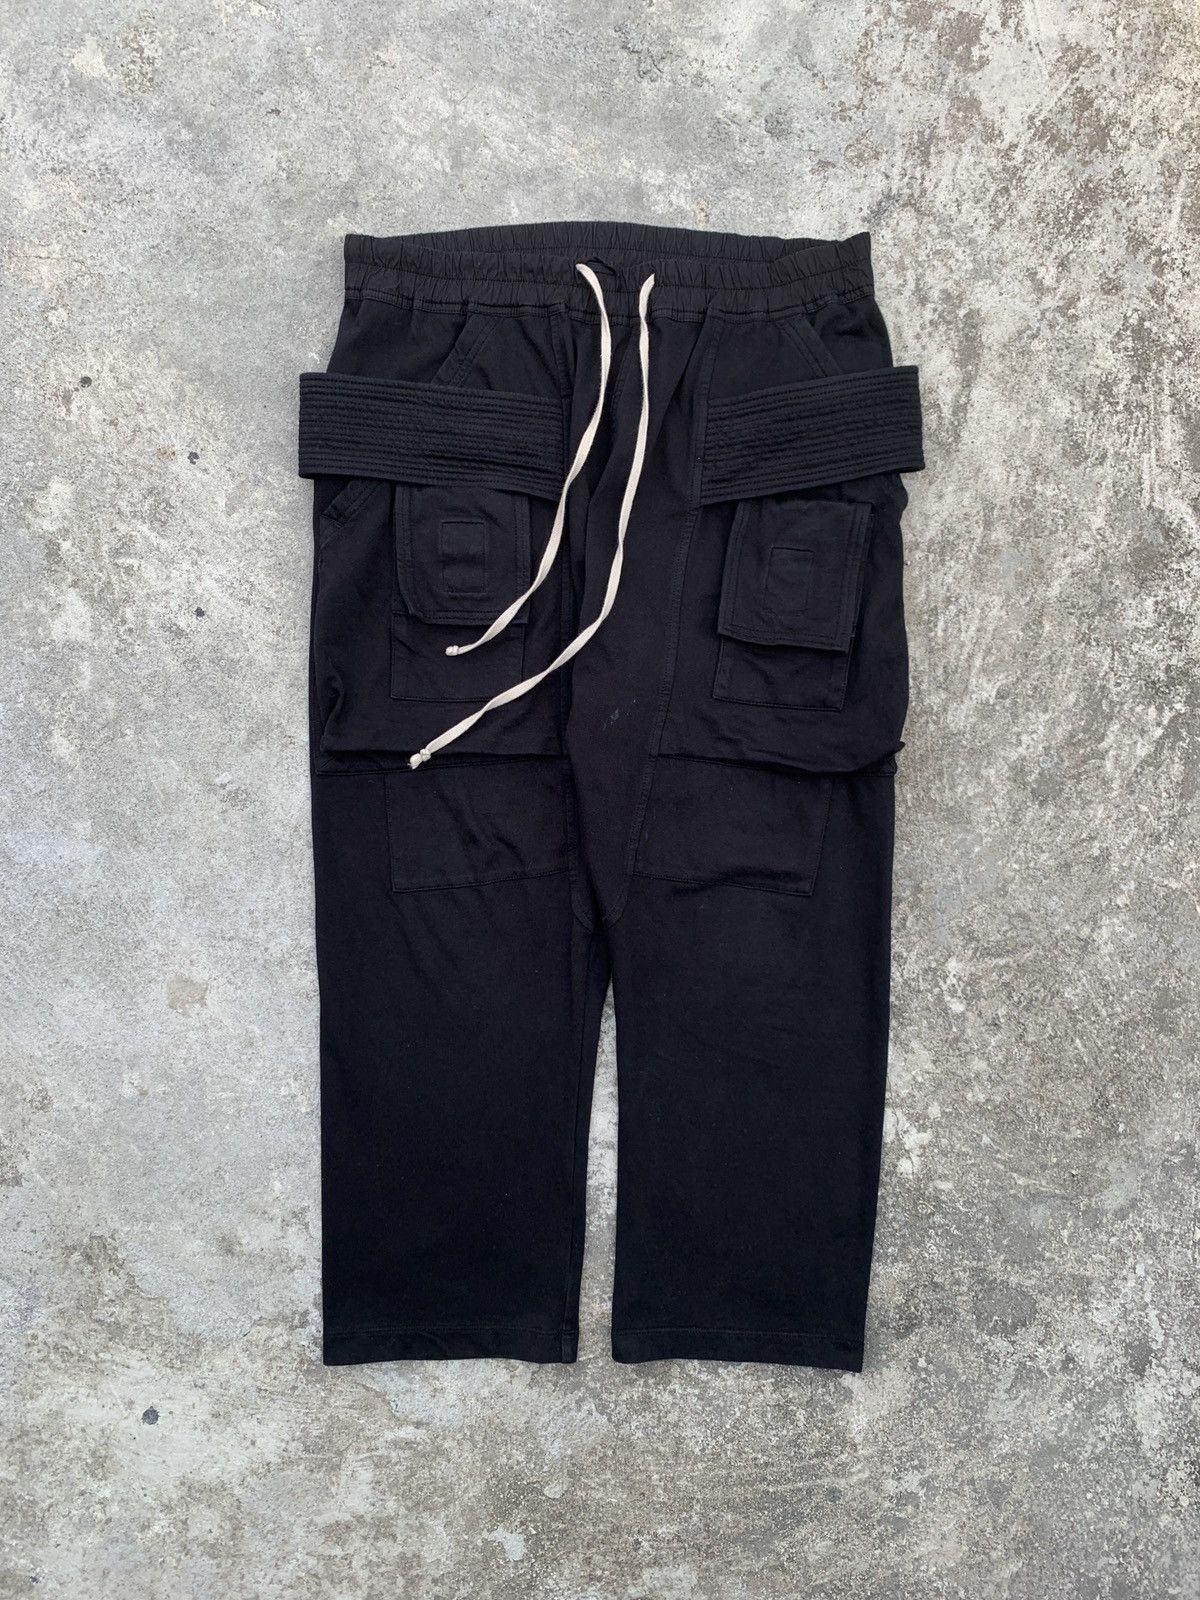 Rick Owens Cropped Creatch Cargo Pants | Grailed